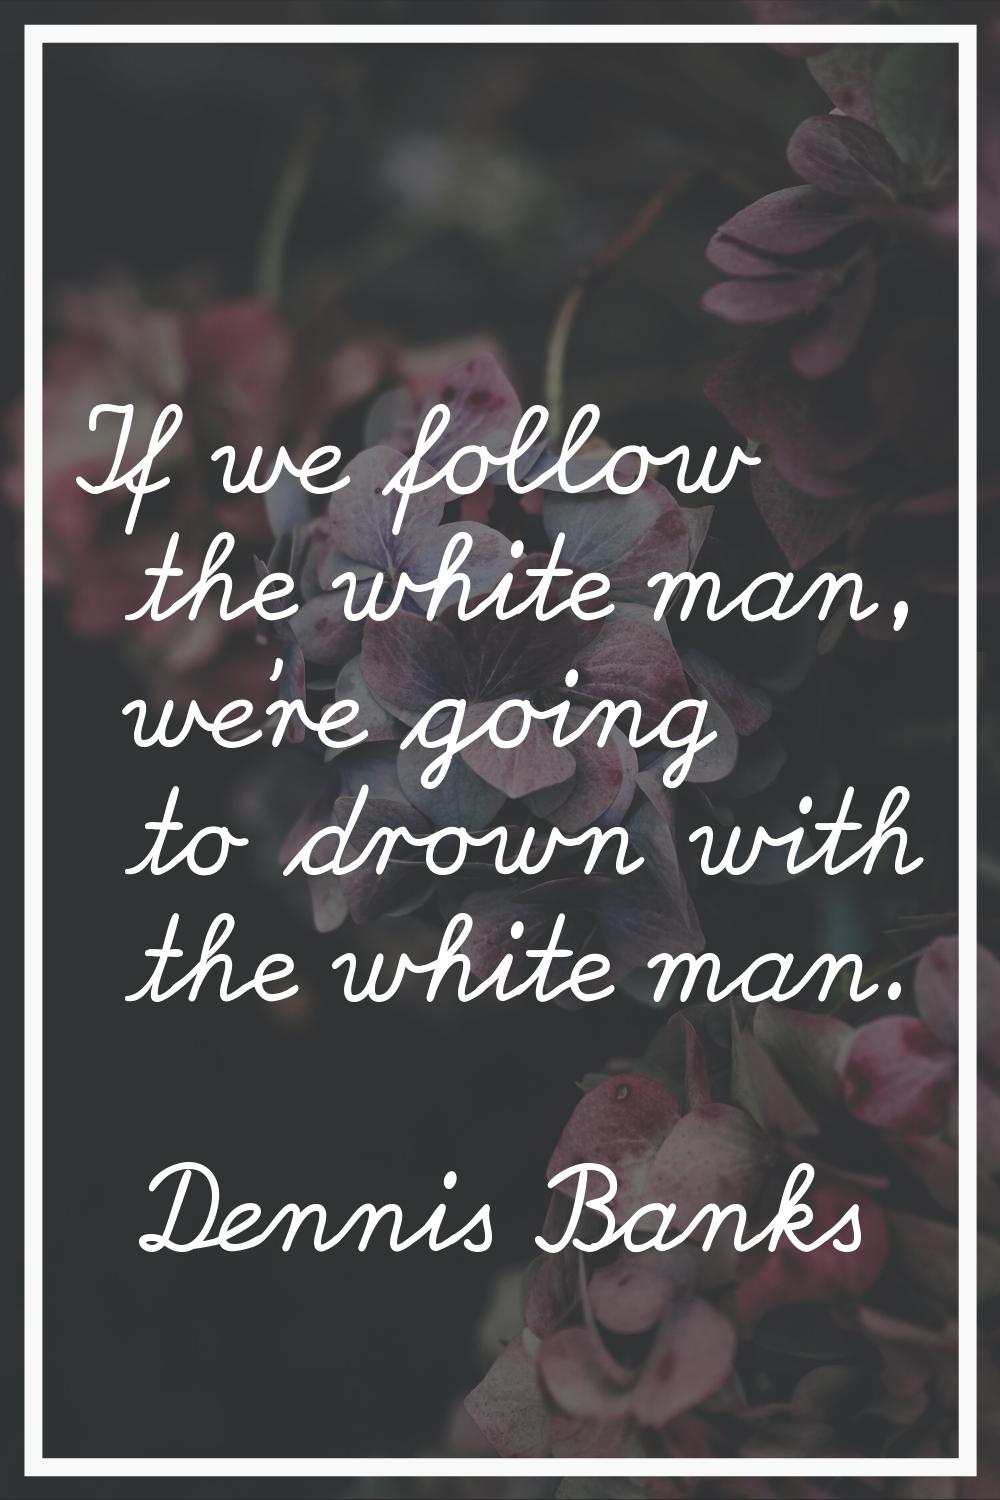 If we follow the white man, we're going to drown with the white man.